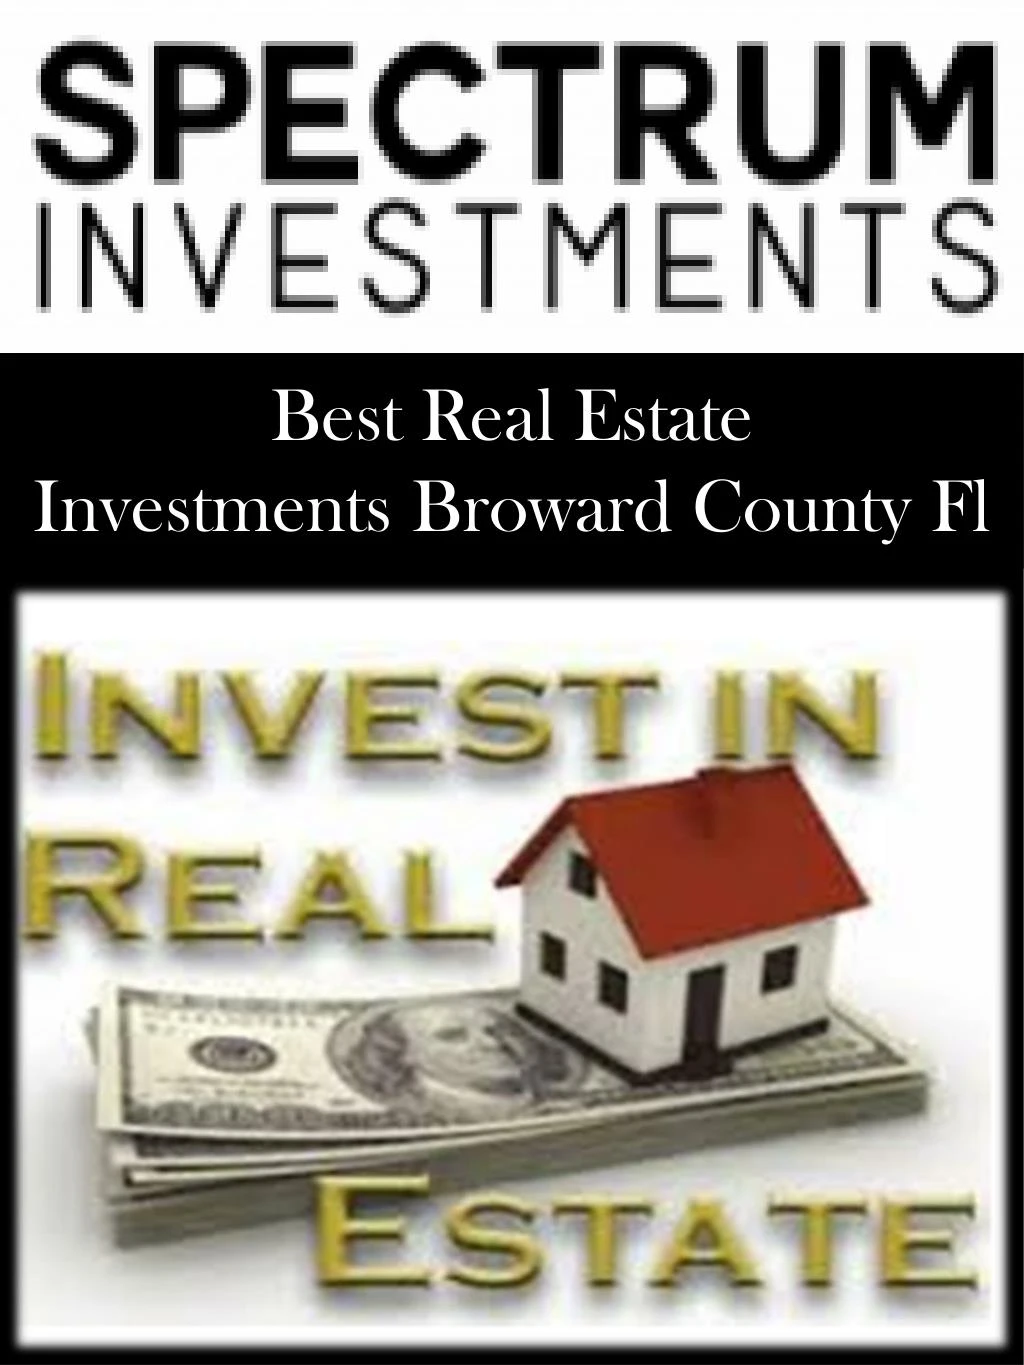 best real estate investments broward county fl n.